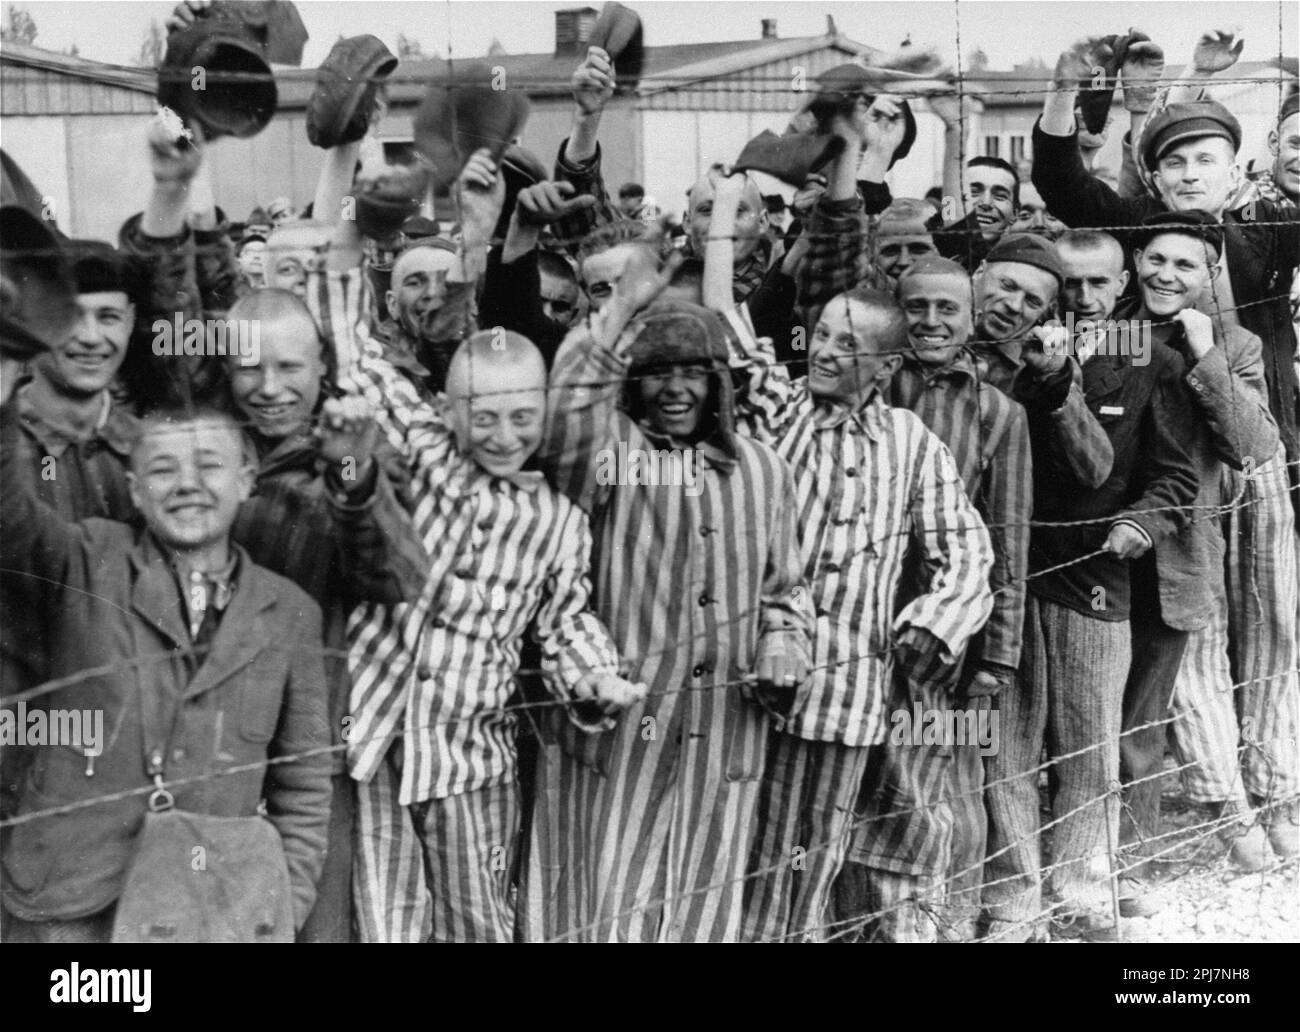 Happy child prisoners waving at the American soldiers as the gates of Dachau concentration camp are opened and the prisoners freed. American Soldiers of the U.S. 7th Army, including members of the 42nd Infantry and 45th Infantry and 20th Armored Divisions participated in the camp’s liberation. Stock Photo